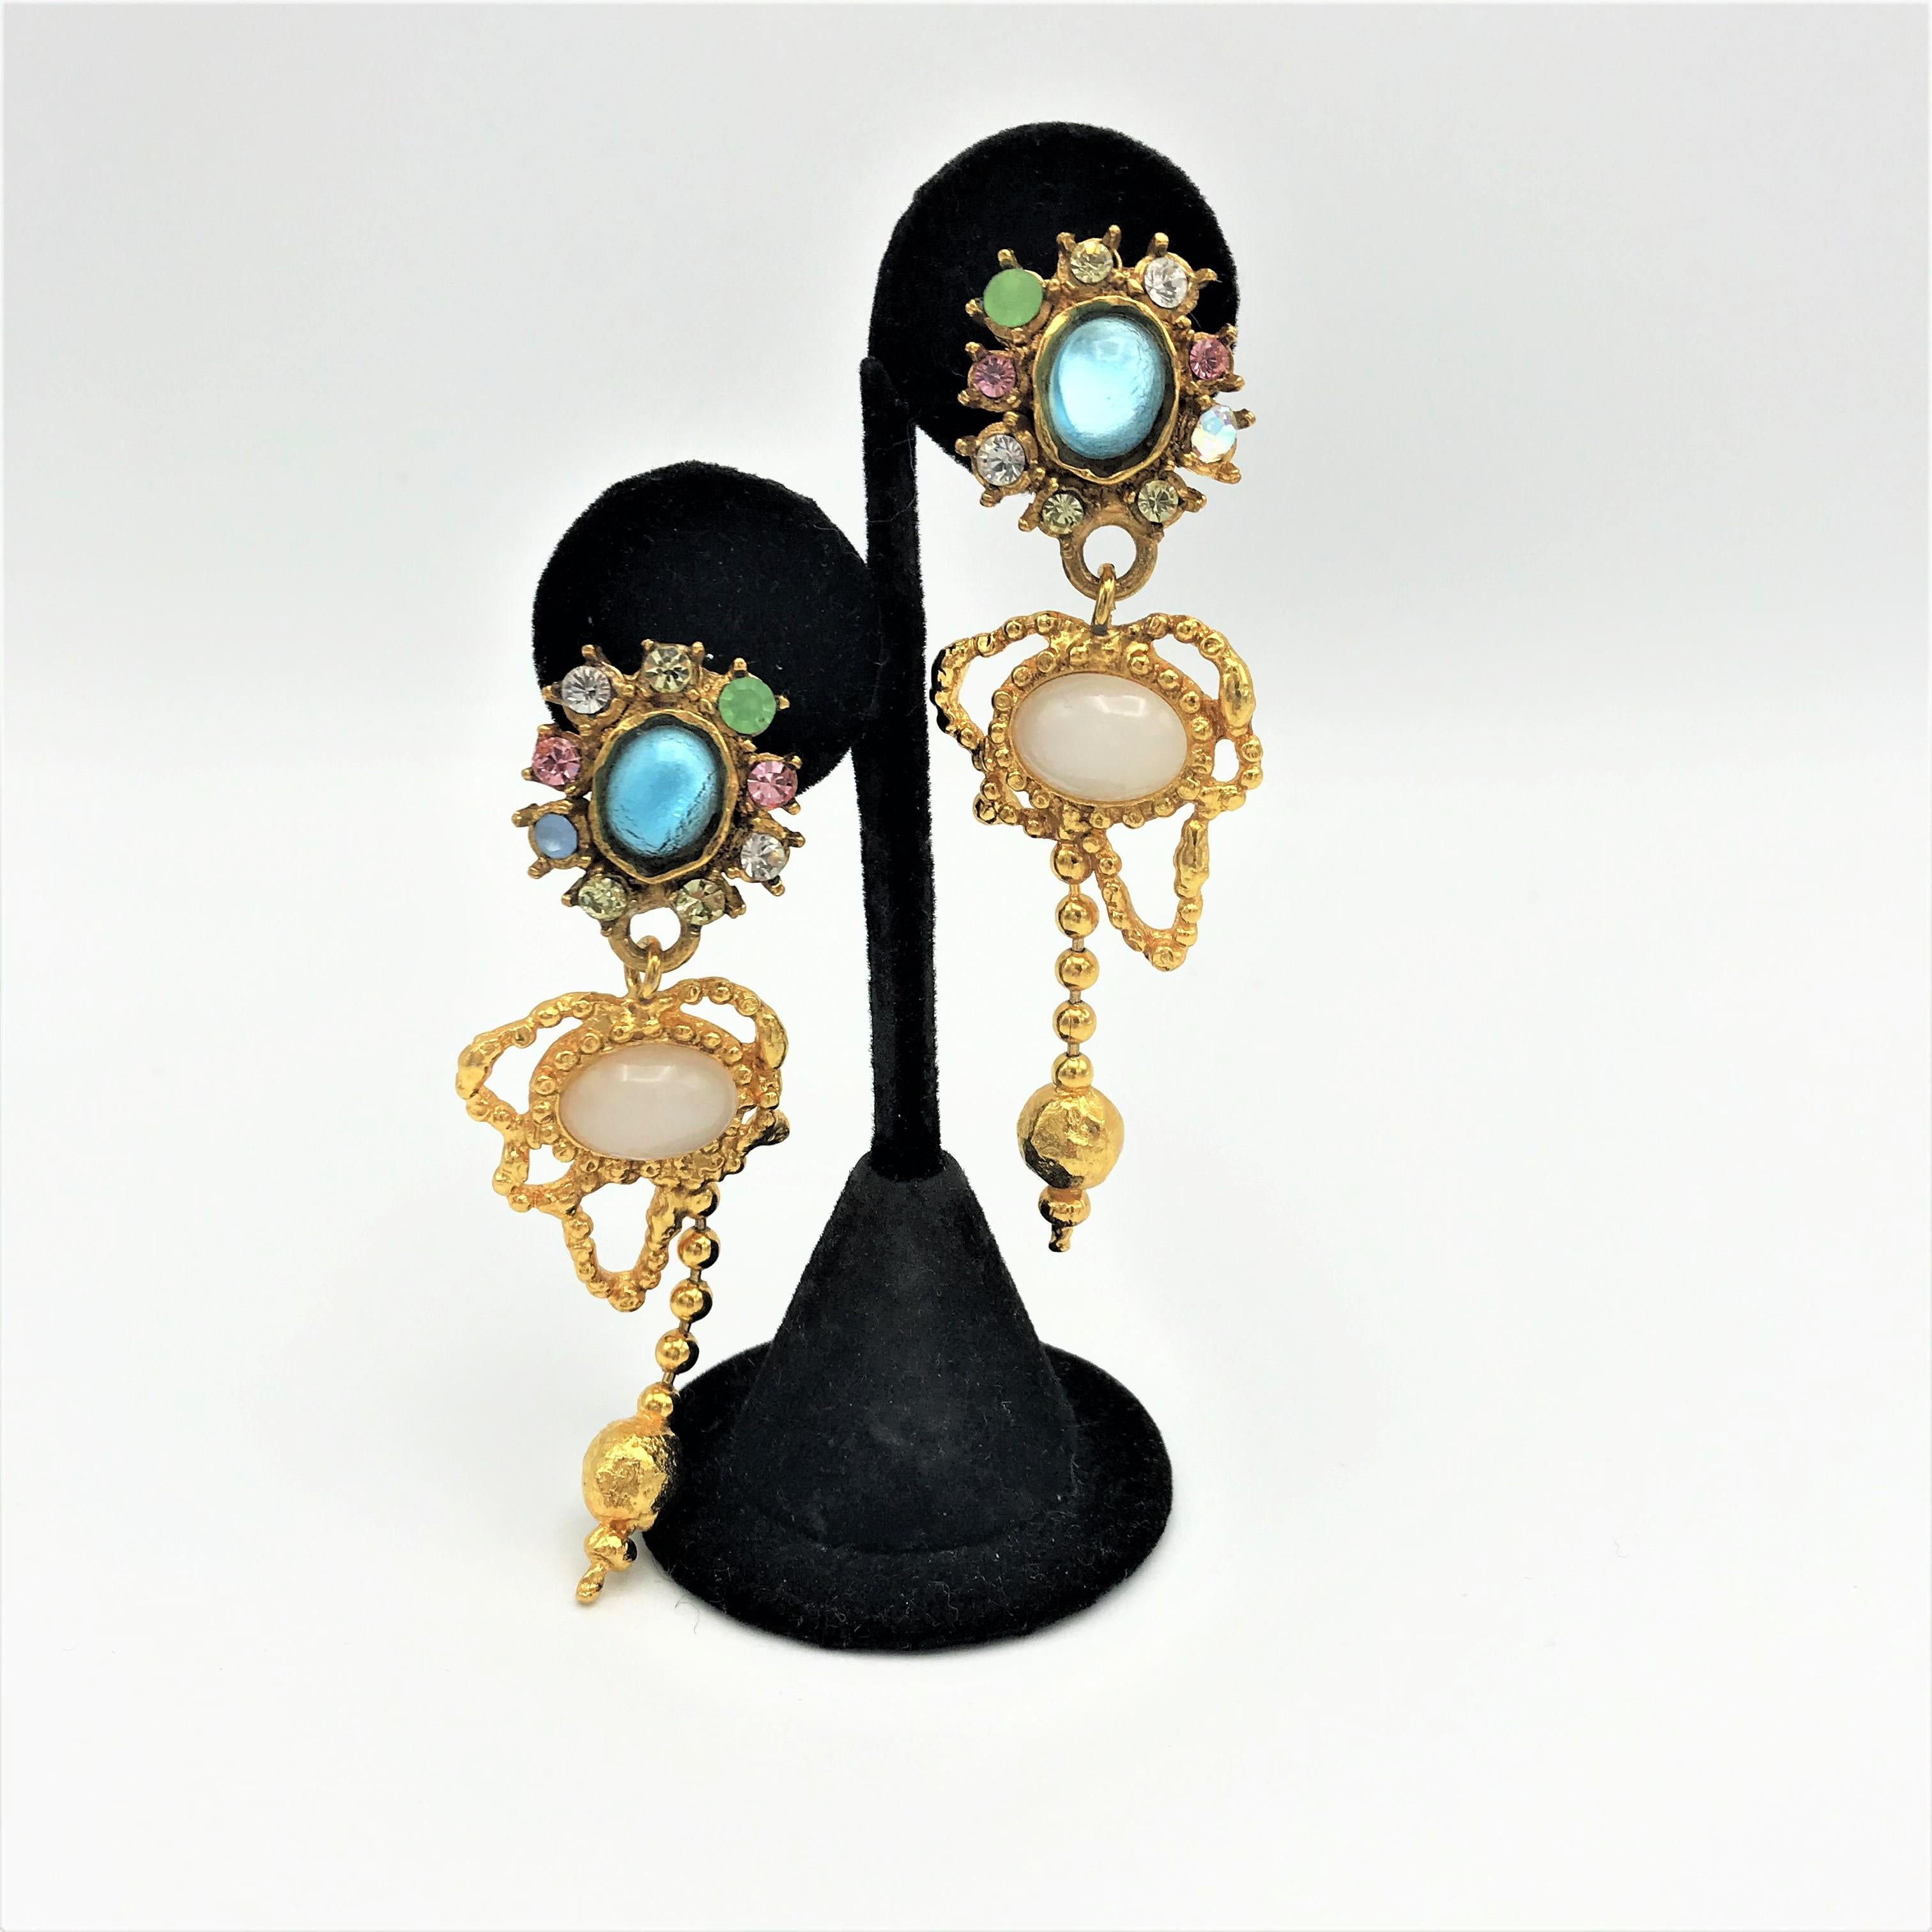 Beautiful feminine hanging ear clips by Ch. Lacroix. The upper part is covered with colorful rhinestones. On it hangs a moving part with white opal stone/imitation. 
Measurement: Length 8 cm, the upper part with the turquoise stones measures